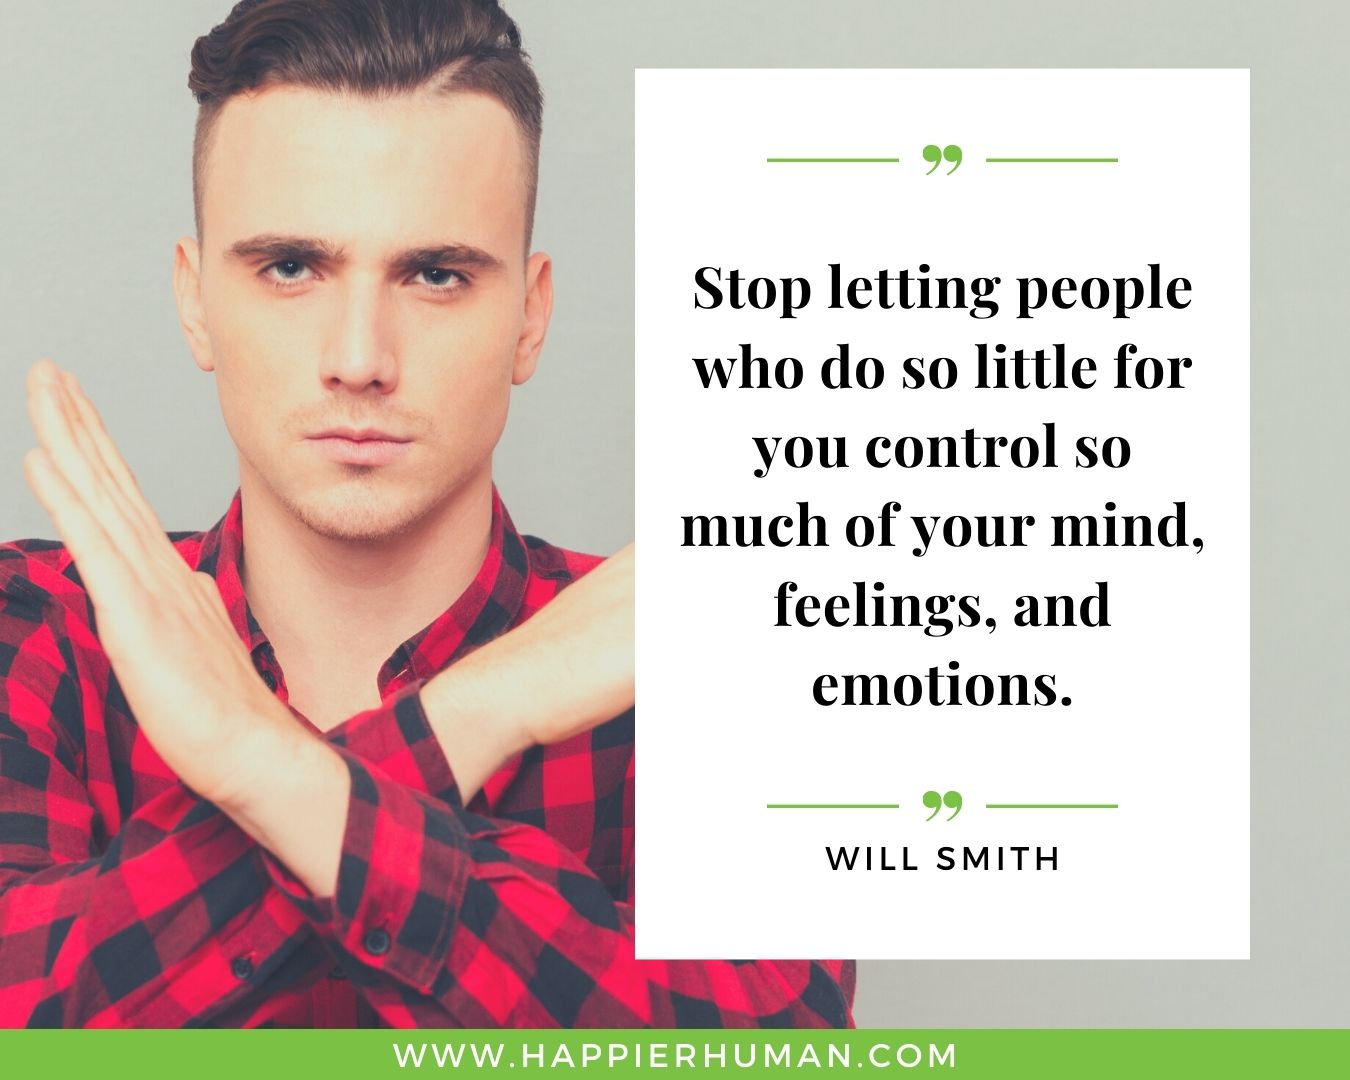 Toxic People Quotes - “Stop letting people who do so little for you control so much of your mind, feelings, and emotions.” – Will Smith